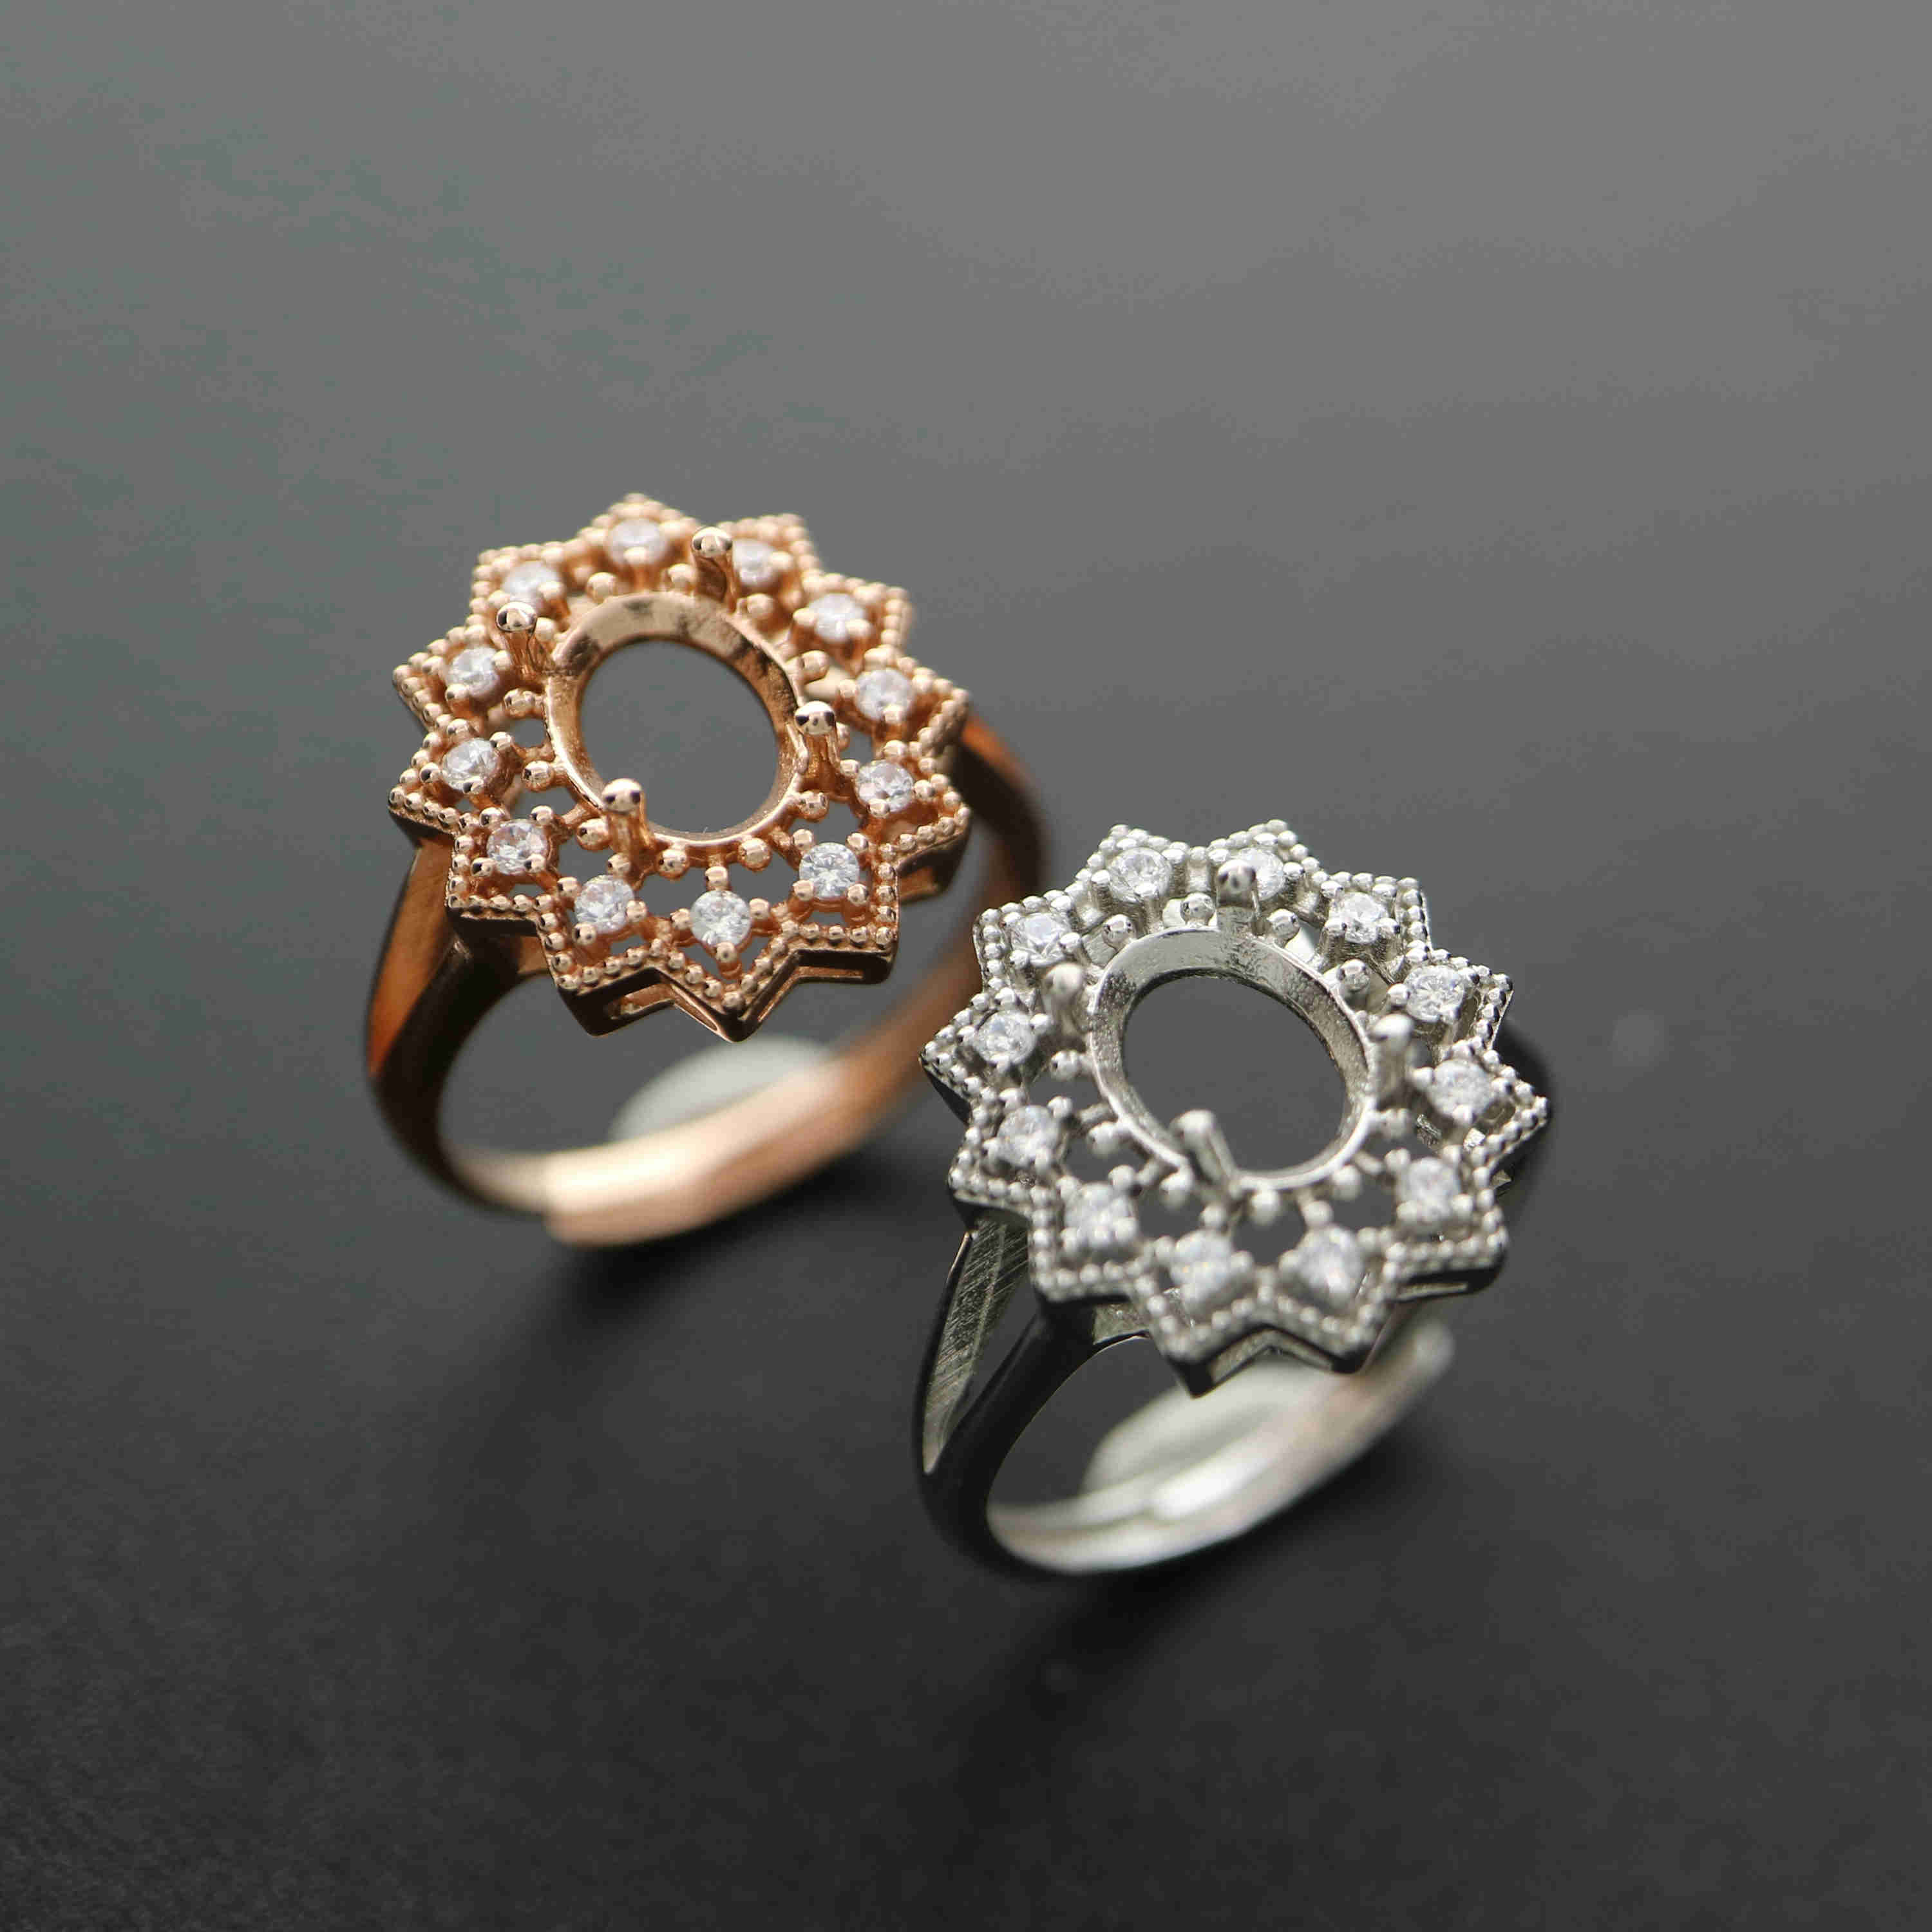 1Pcs Multiple Sizes Luxury Lace Rose Gold Silver Oval Gems Cz Stone Prong Bezel Solid 925 Sterling Silver Adjustable Ring Settings 1224014 - Click Image to Close